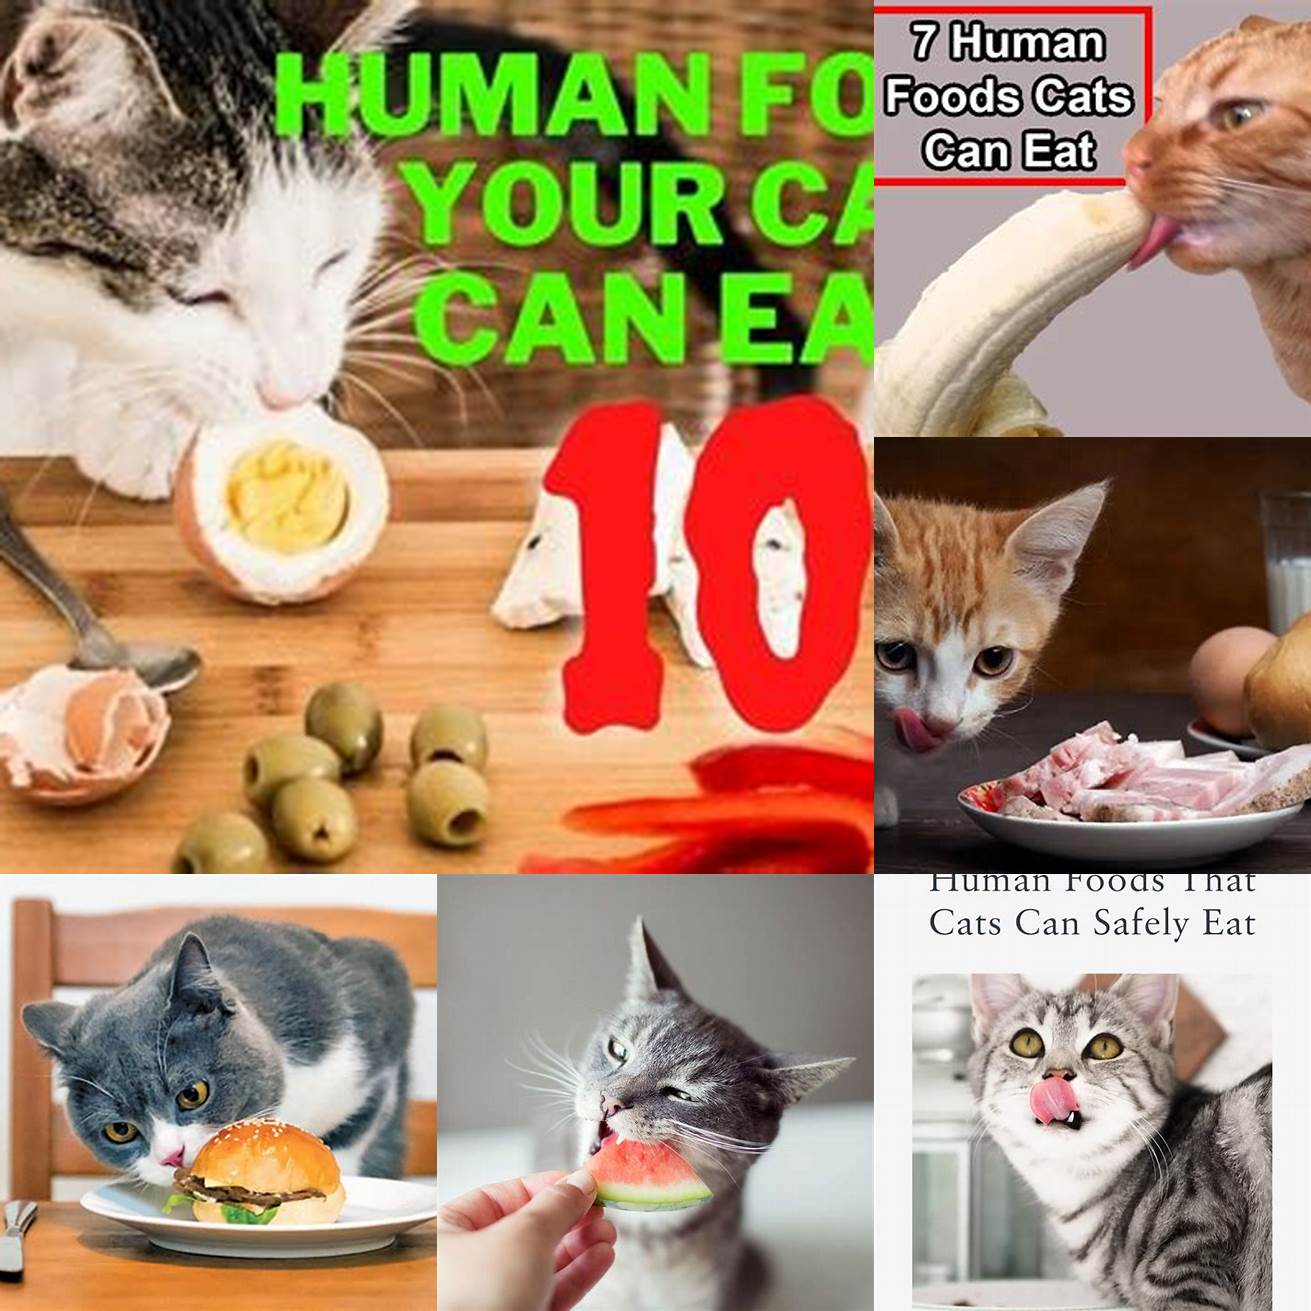 Can Cats Eat Human Food